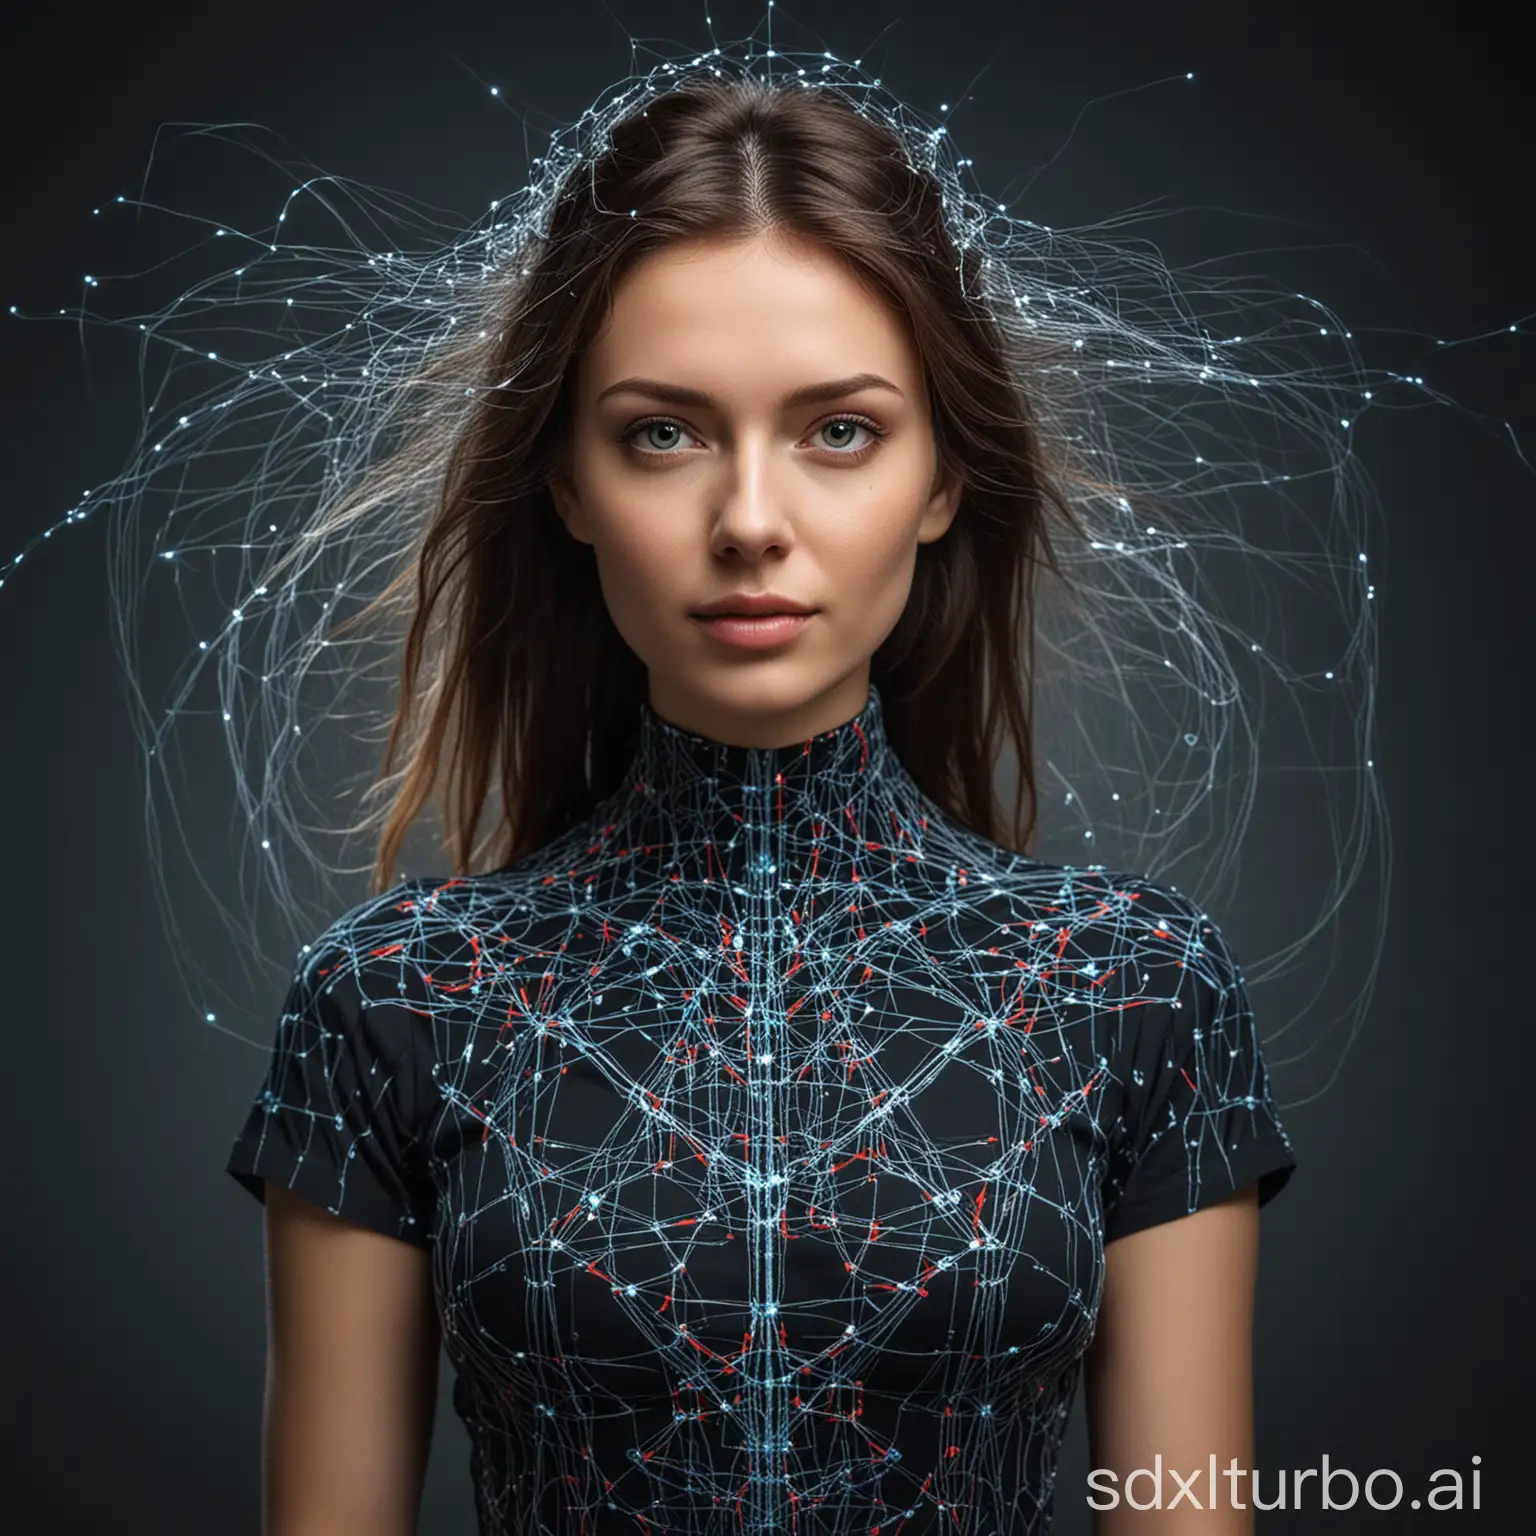 Artistic-Collaboration-Neural-Network-Photo-Session-Capturing-Surreal-Imagery